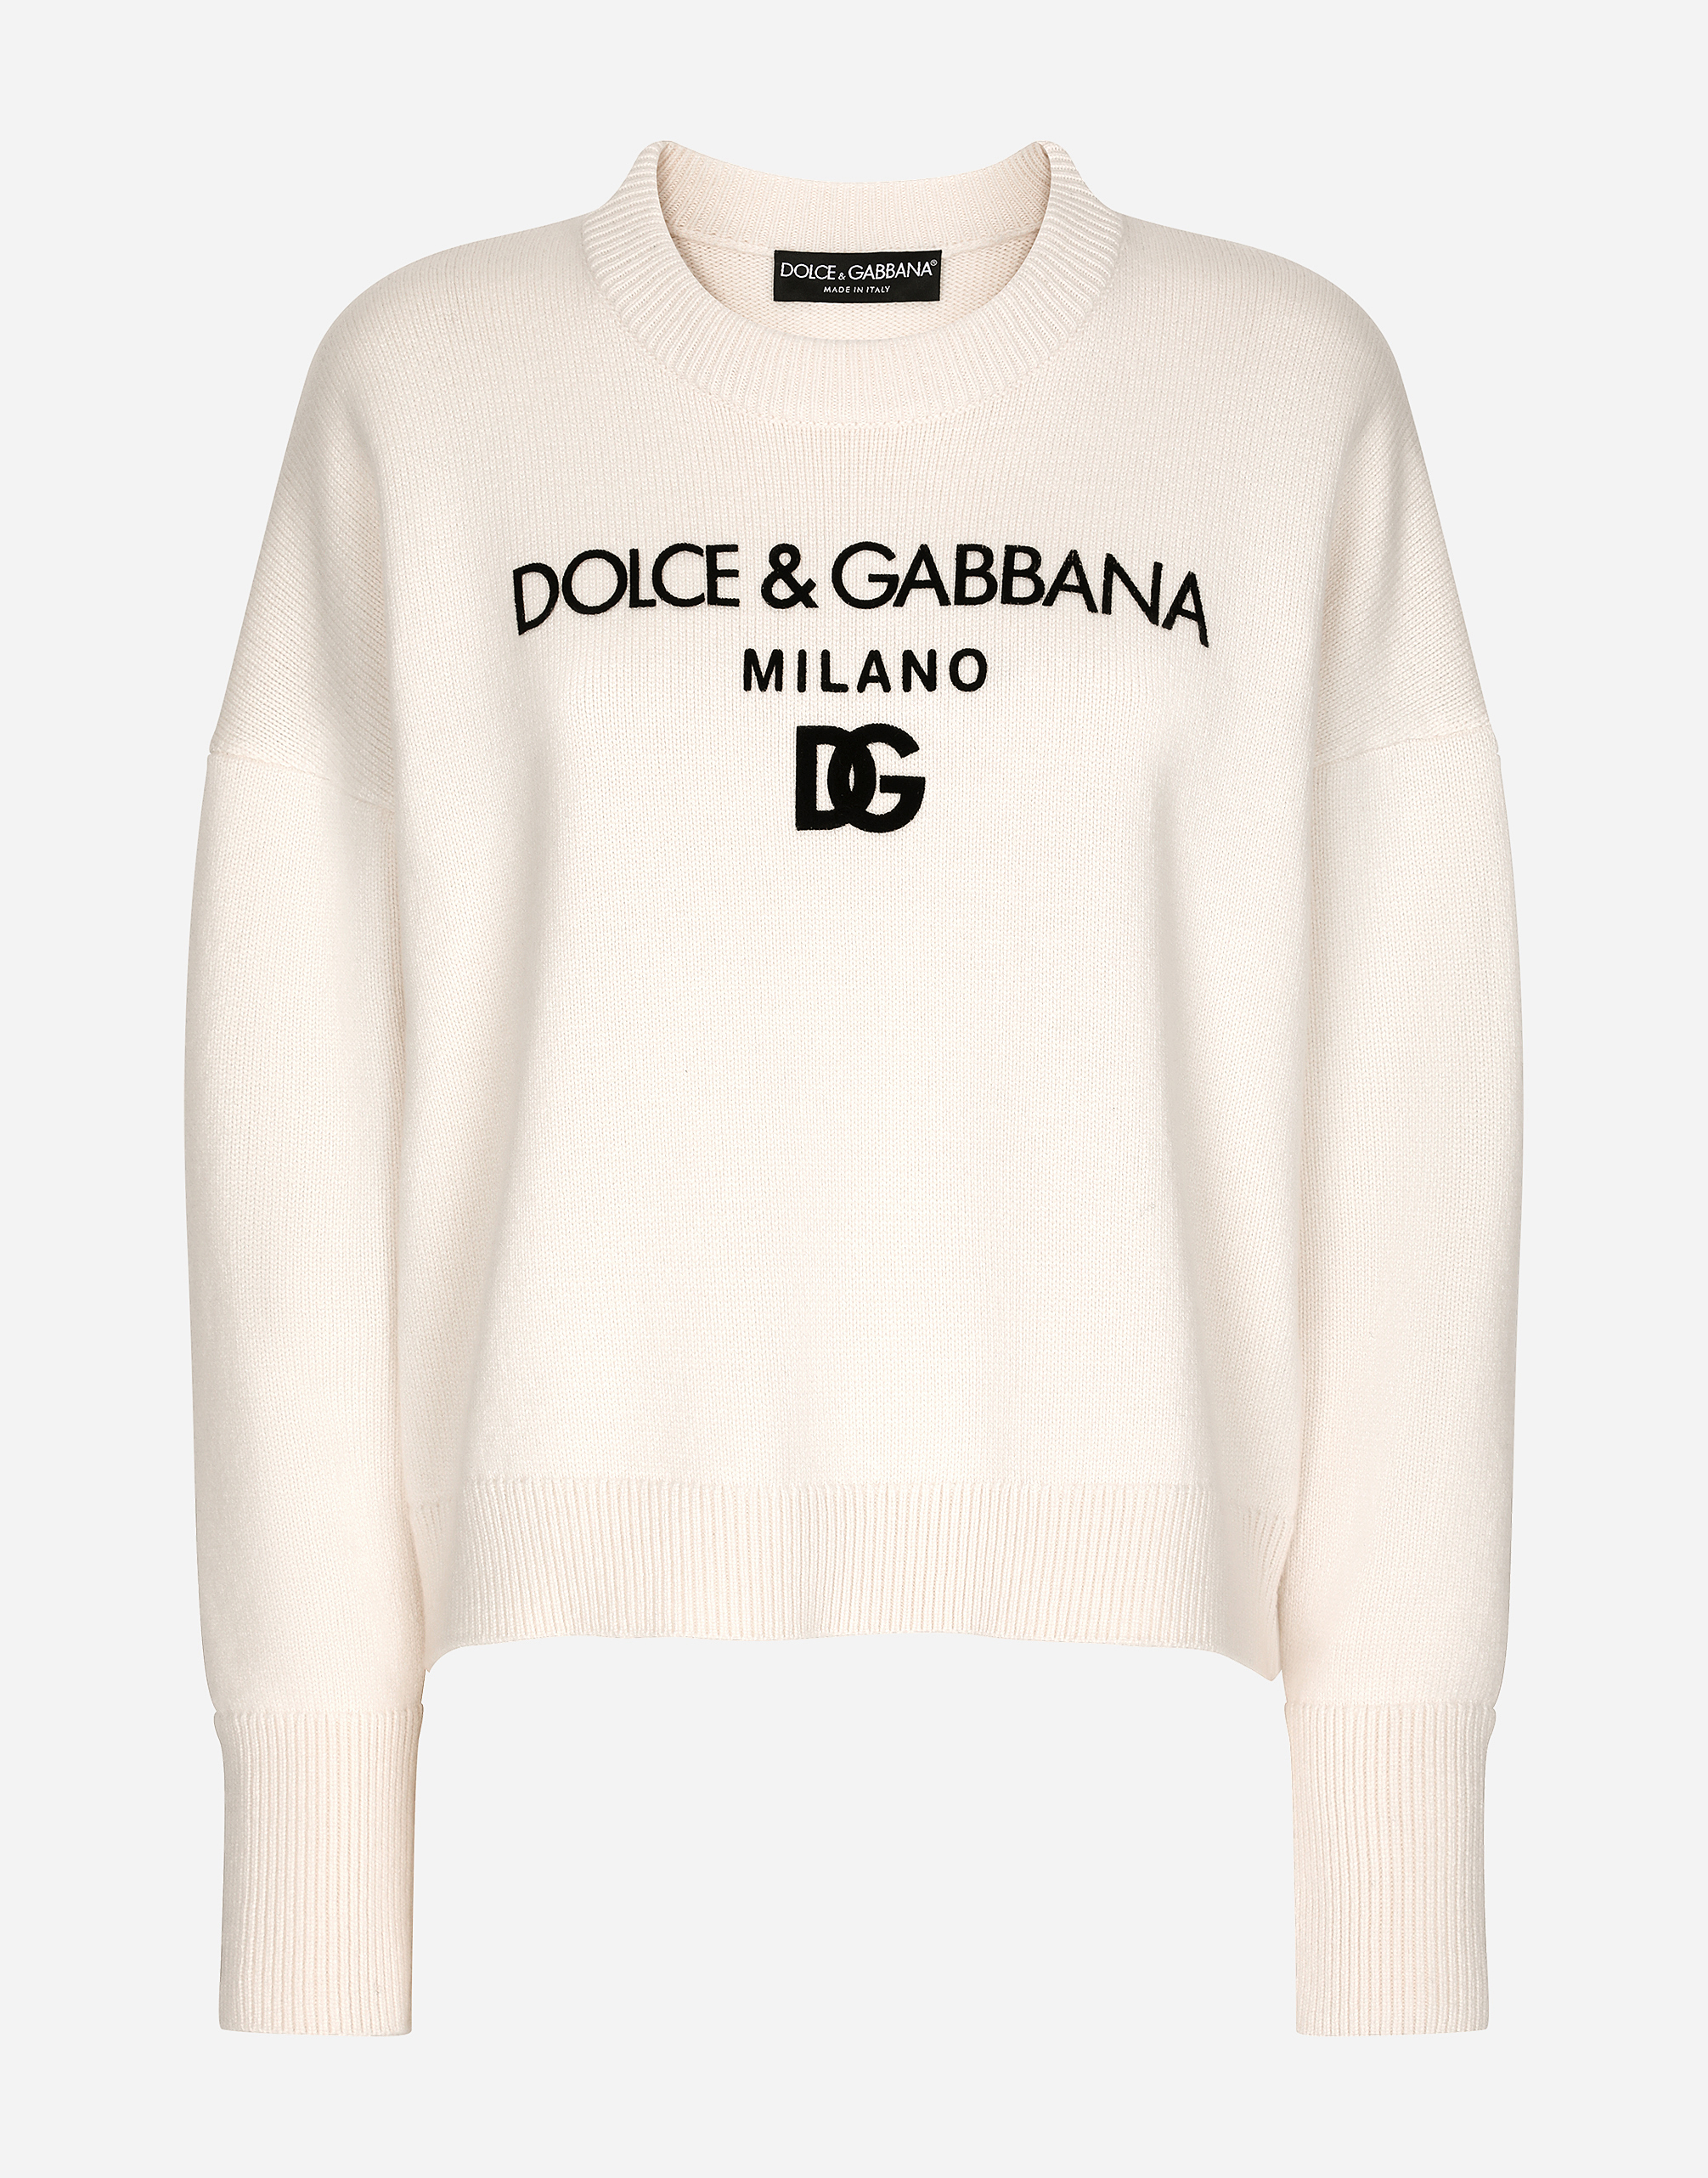 Dolce & Gabbana Cashmere Sweater With Flocked Dg Logo In White